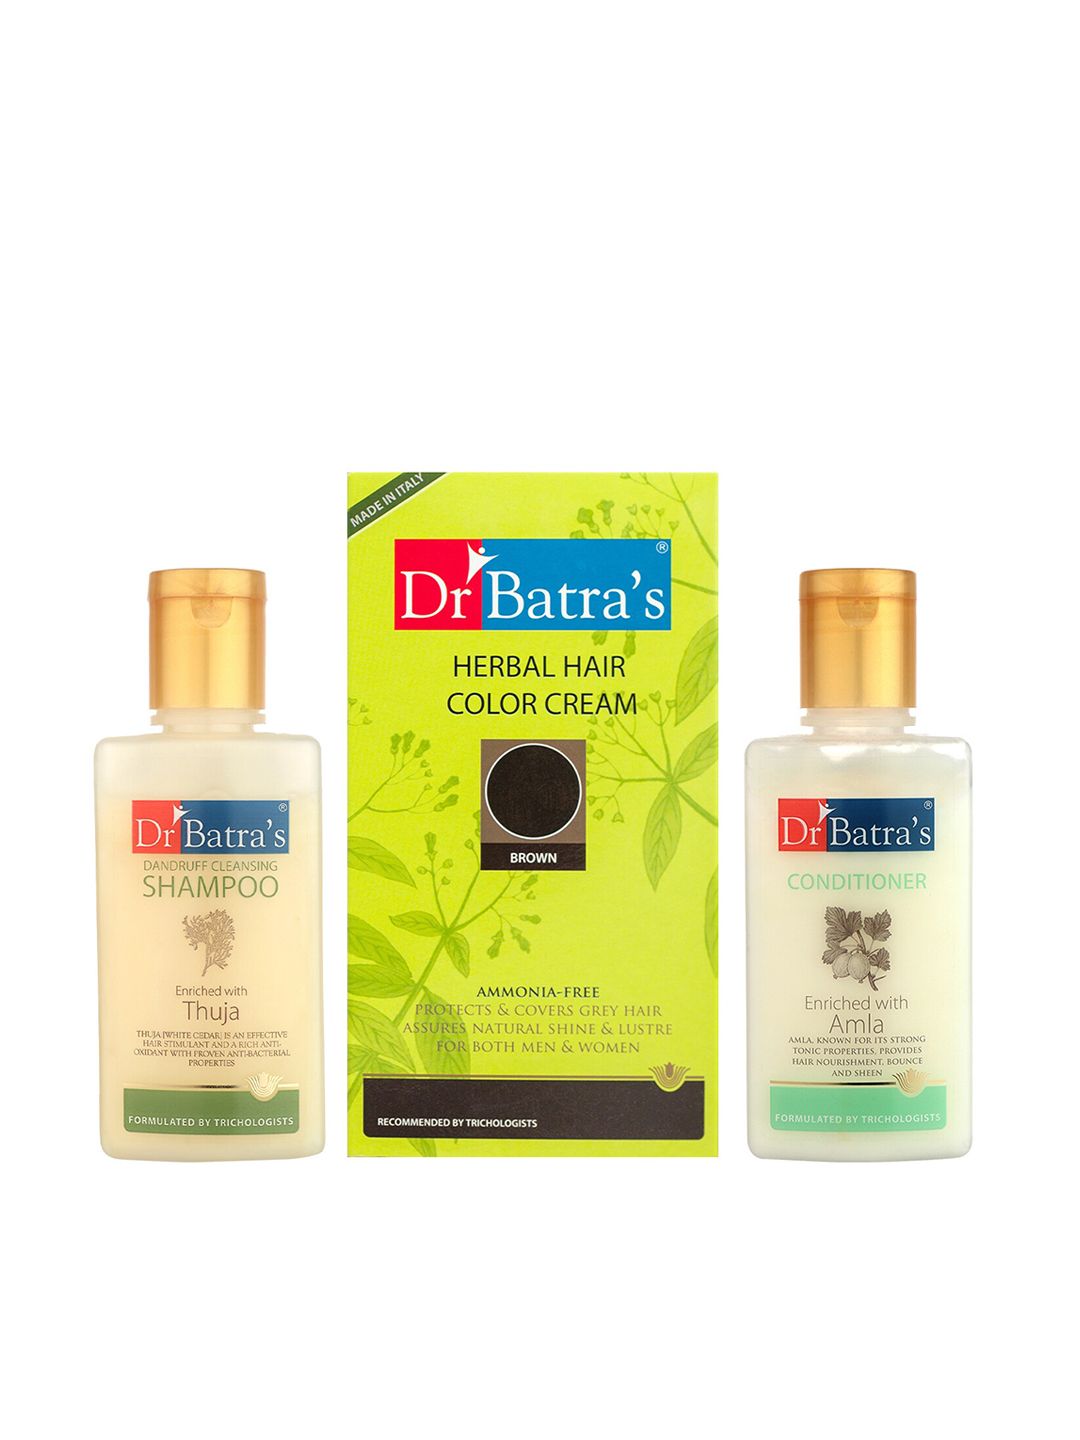 Dr Batra's Unisex Herbal Hair Color Cream with Dandruff Cleansing Shampoo & Conditioner Price in India